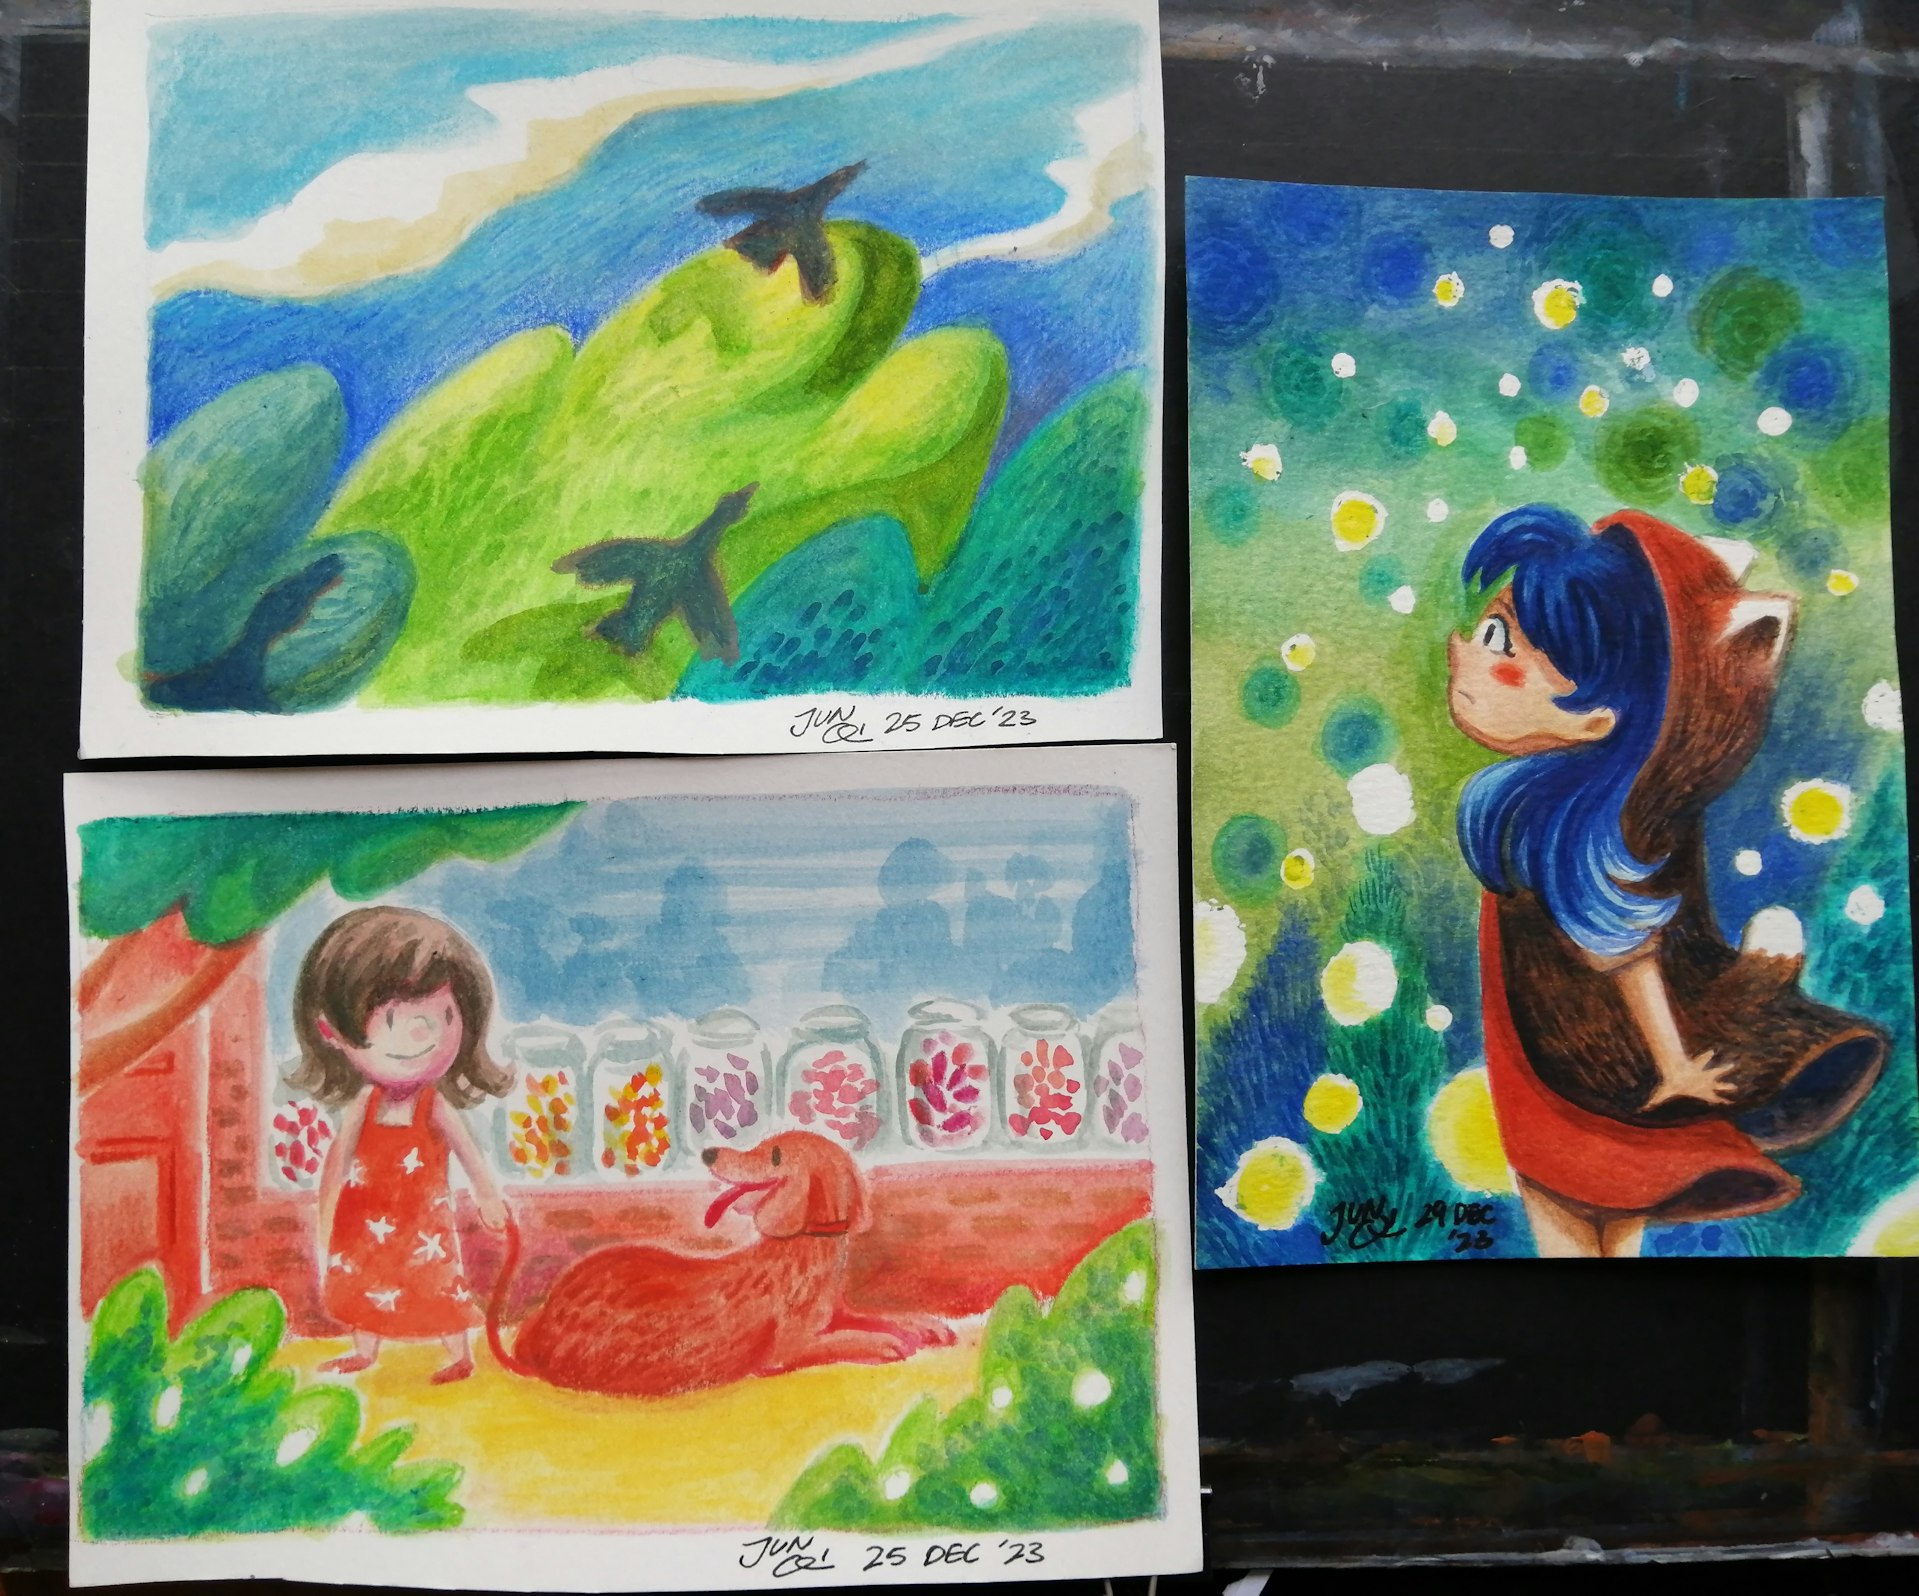 Montage of 3 different watercolour illustrations.